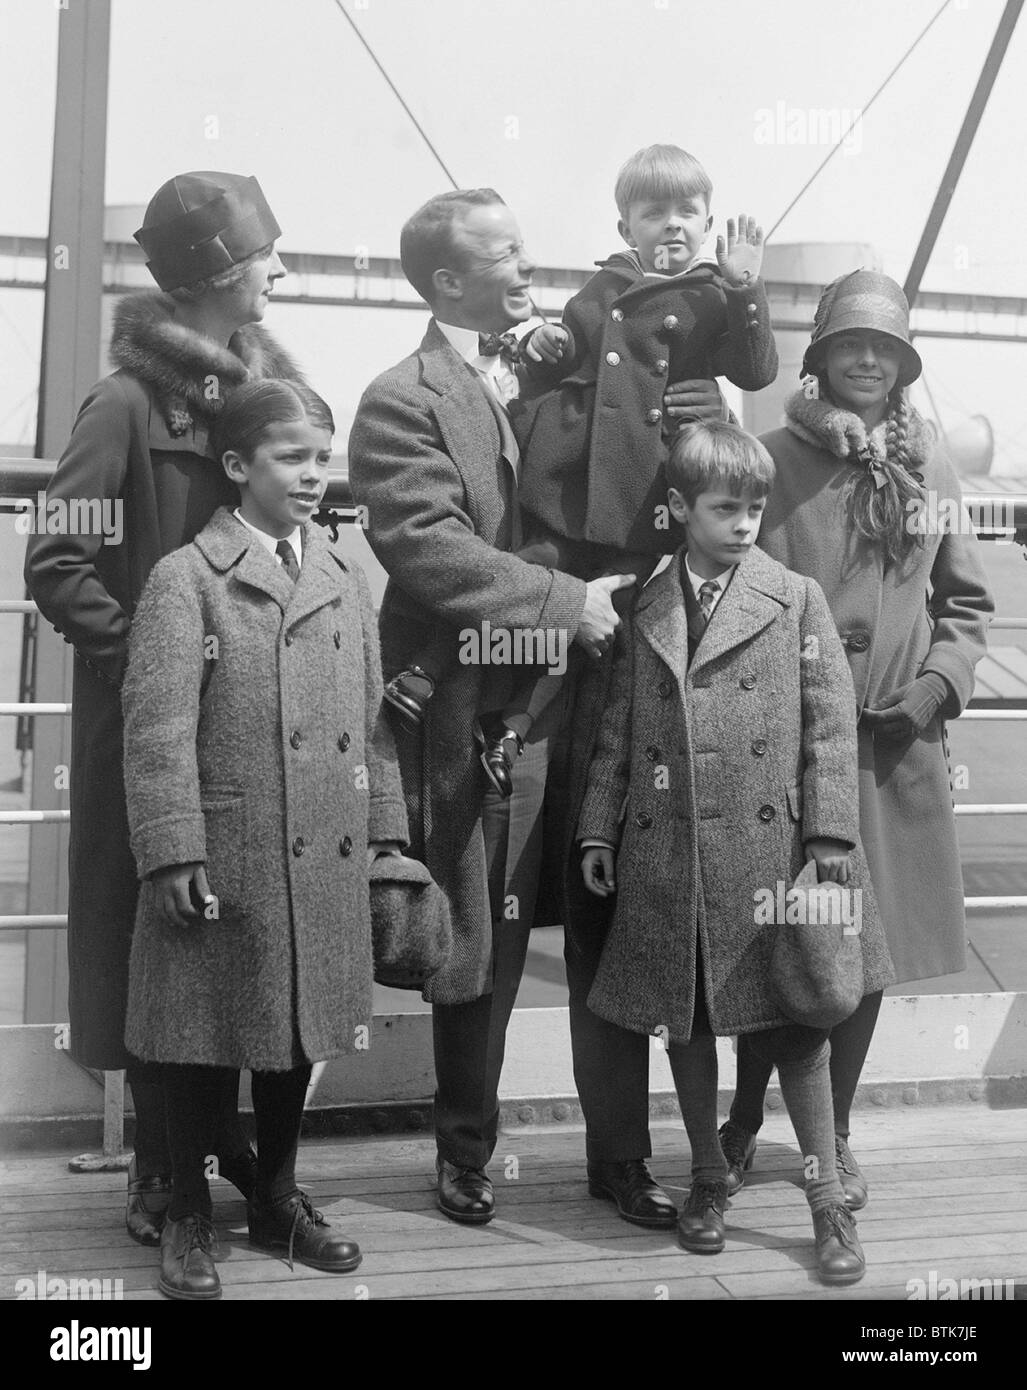 Theodore Roosevelt Jr. (1887-1944), with his wife Eleanor (1888-1960), and their four children, Grace, Theodore (left), Cornelius (right), and Quentin (held by father). Ca. 1925. Stock Photo